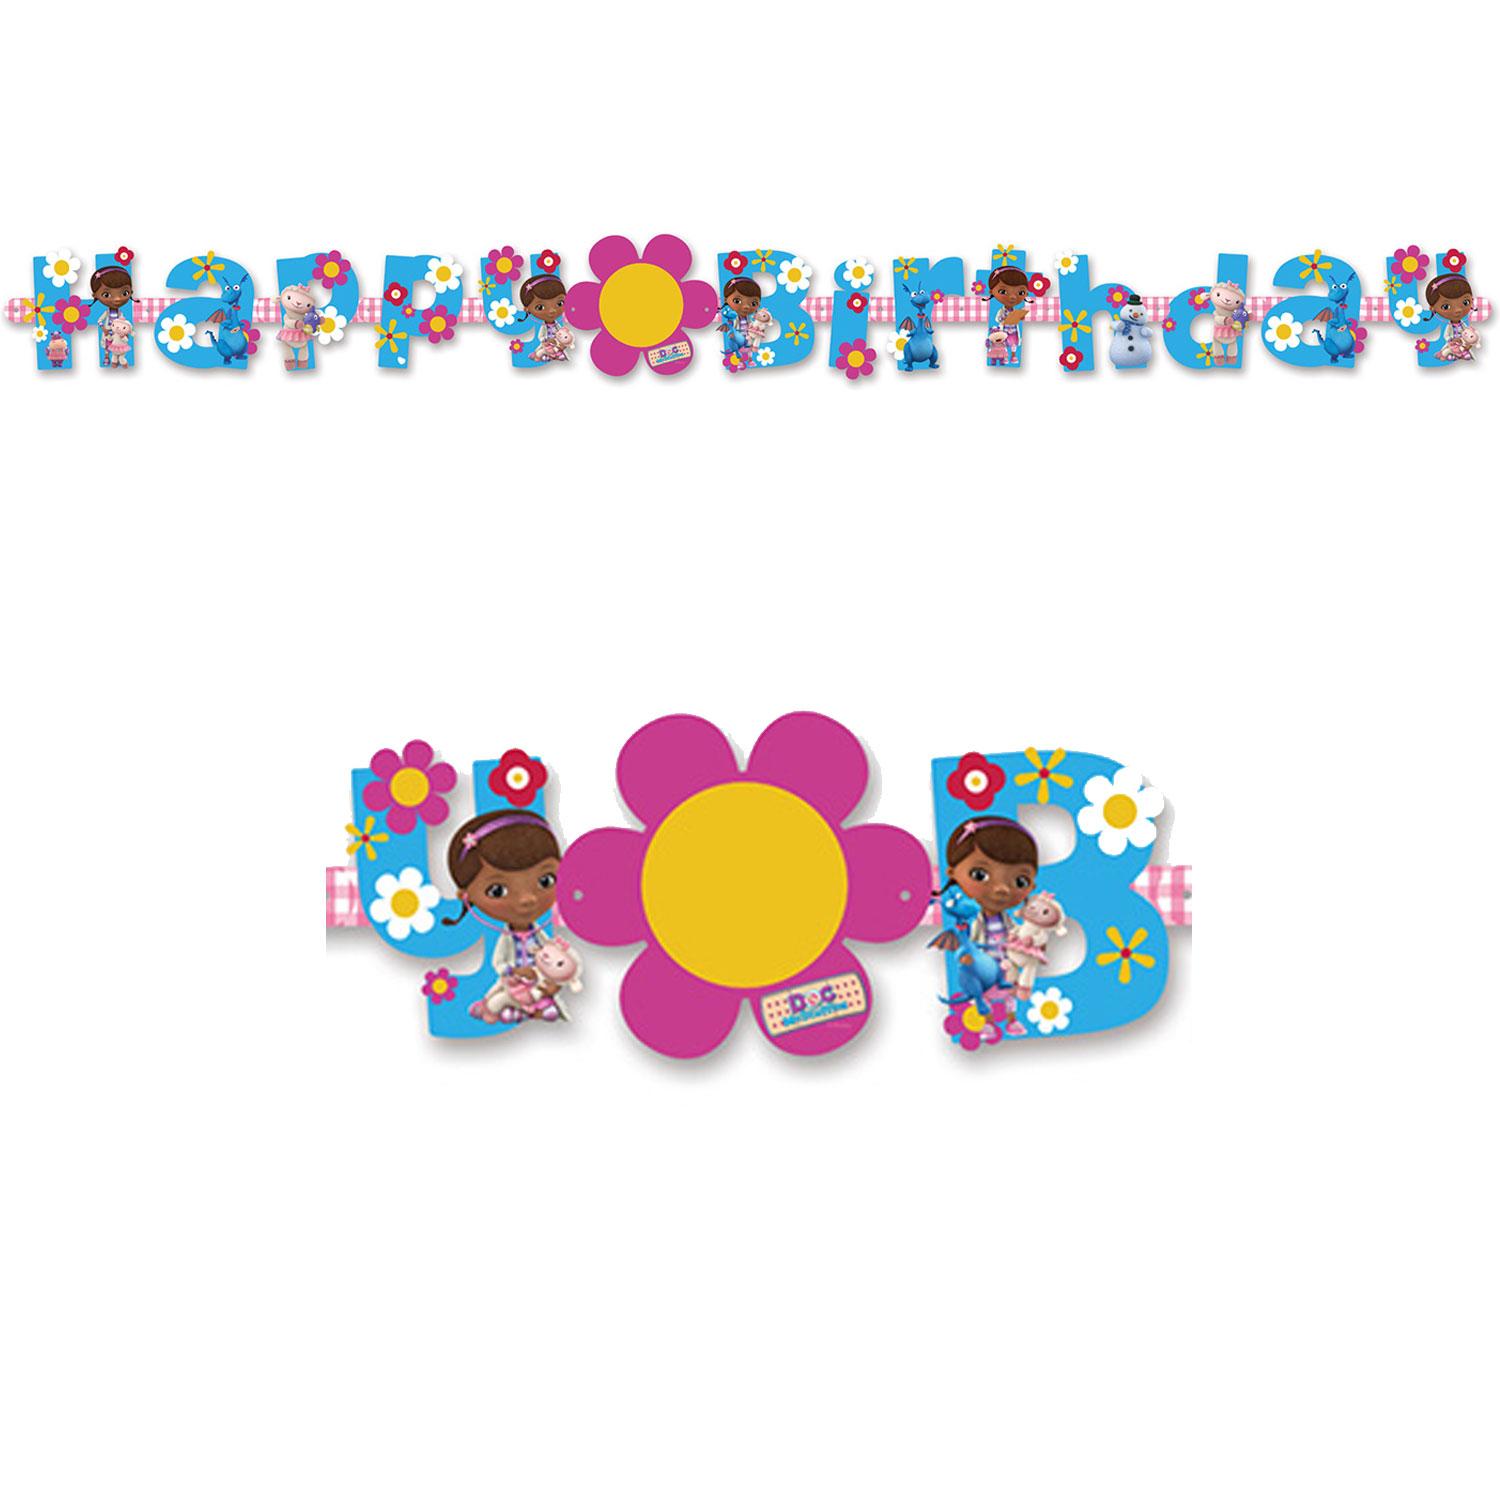 Doc McStuffins Add an Age Letter Banner - 1.8m x 14cm fully licensed by Disney Junior by Amscan 996903 and available here at Karnival Costumes online party shop